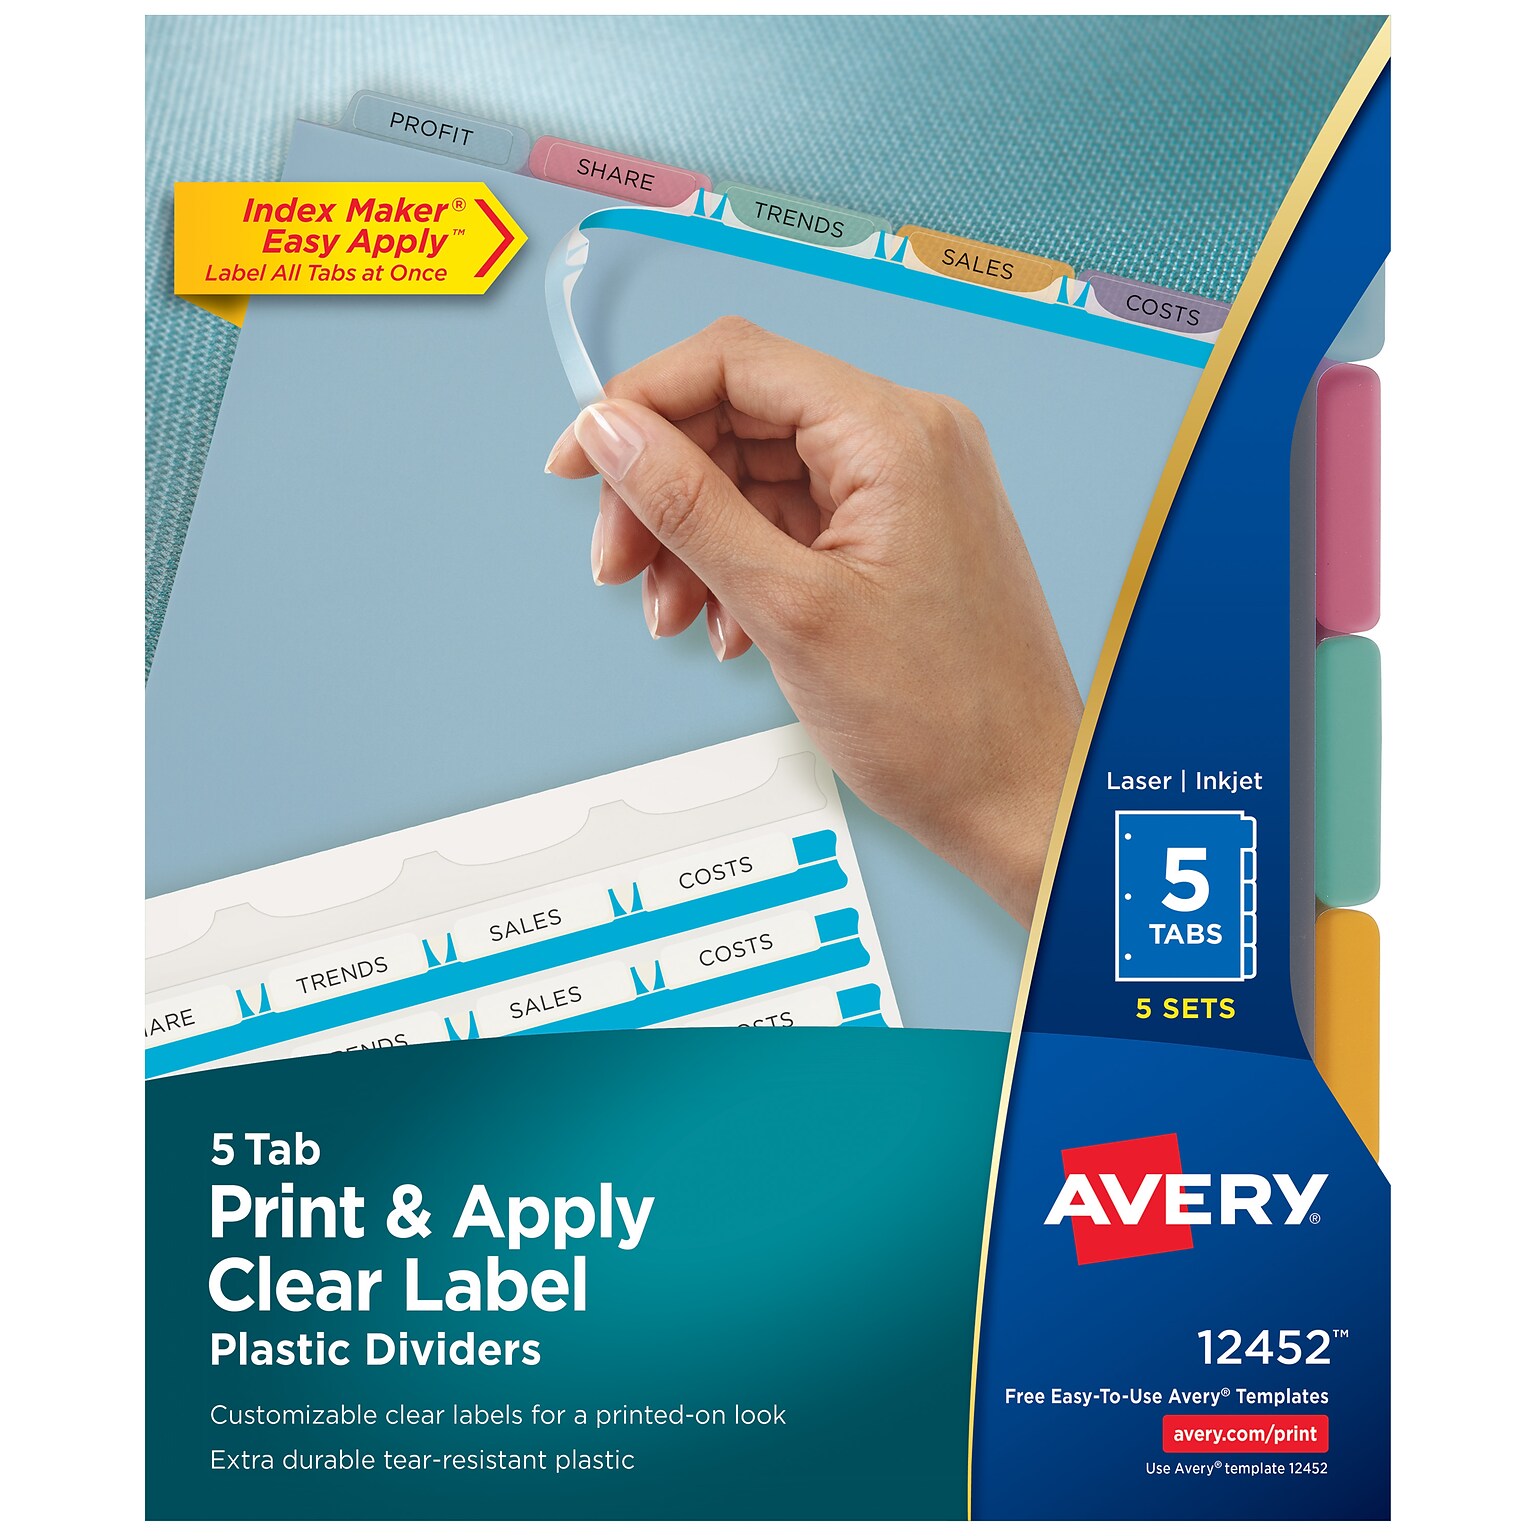 Avery Index Maker Plastic Dividers with Print & Apply Label Sheets, 5 Tabs, Multicolor, 5 Sets/Pack (12452)